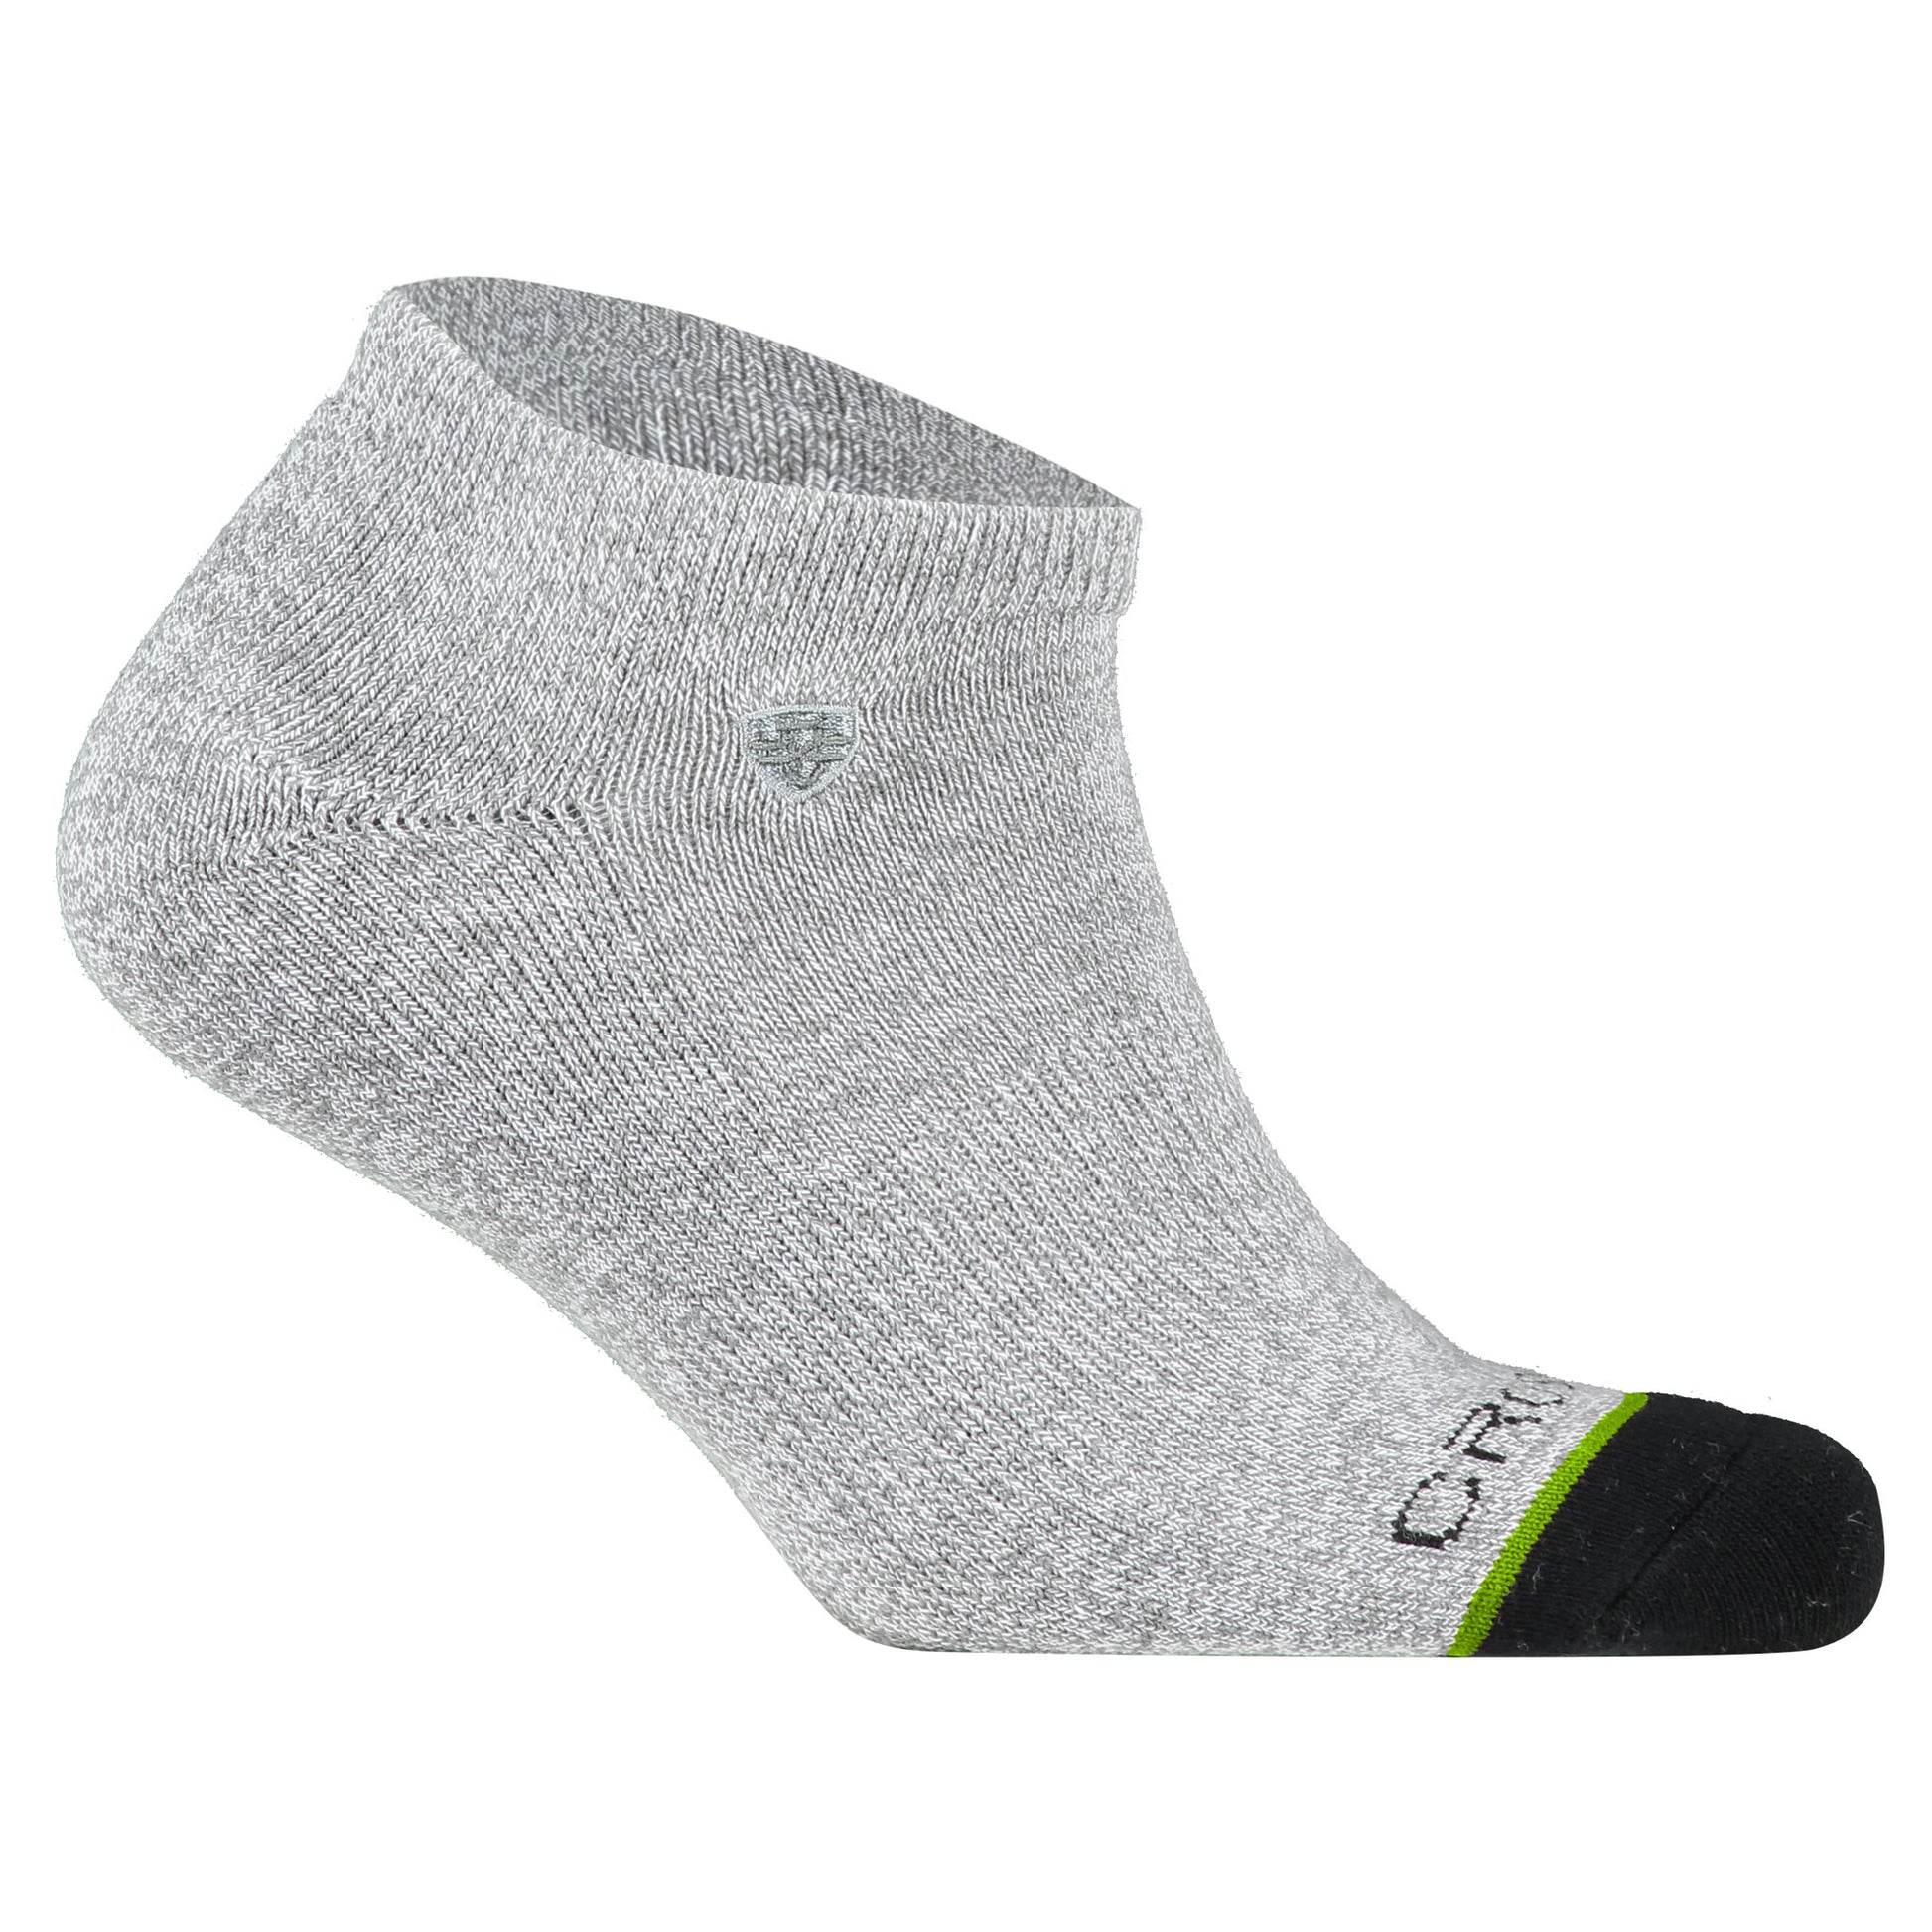 Crossfly men's Original Low Socks in grey from the Everyday series, featuring Flat Toe Seams and 360 Hold.